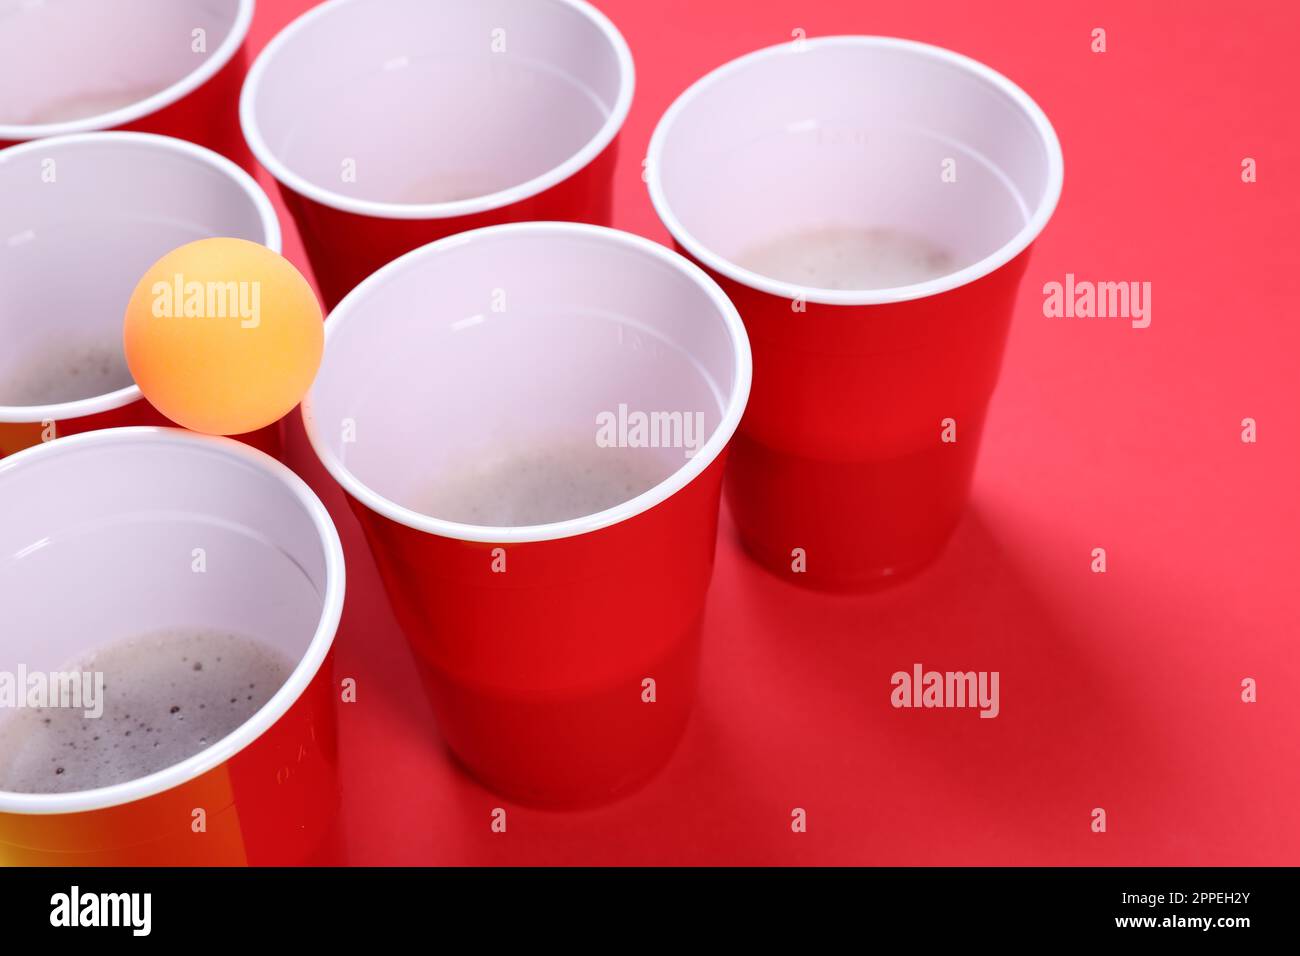 https://c8.alamy.com/comp/2PPEH2Y/plastic-cups-and-ball-for-beer-pong-on-red-background-2PPEH2Y.jpg